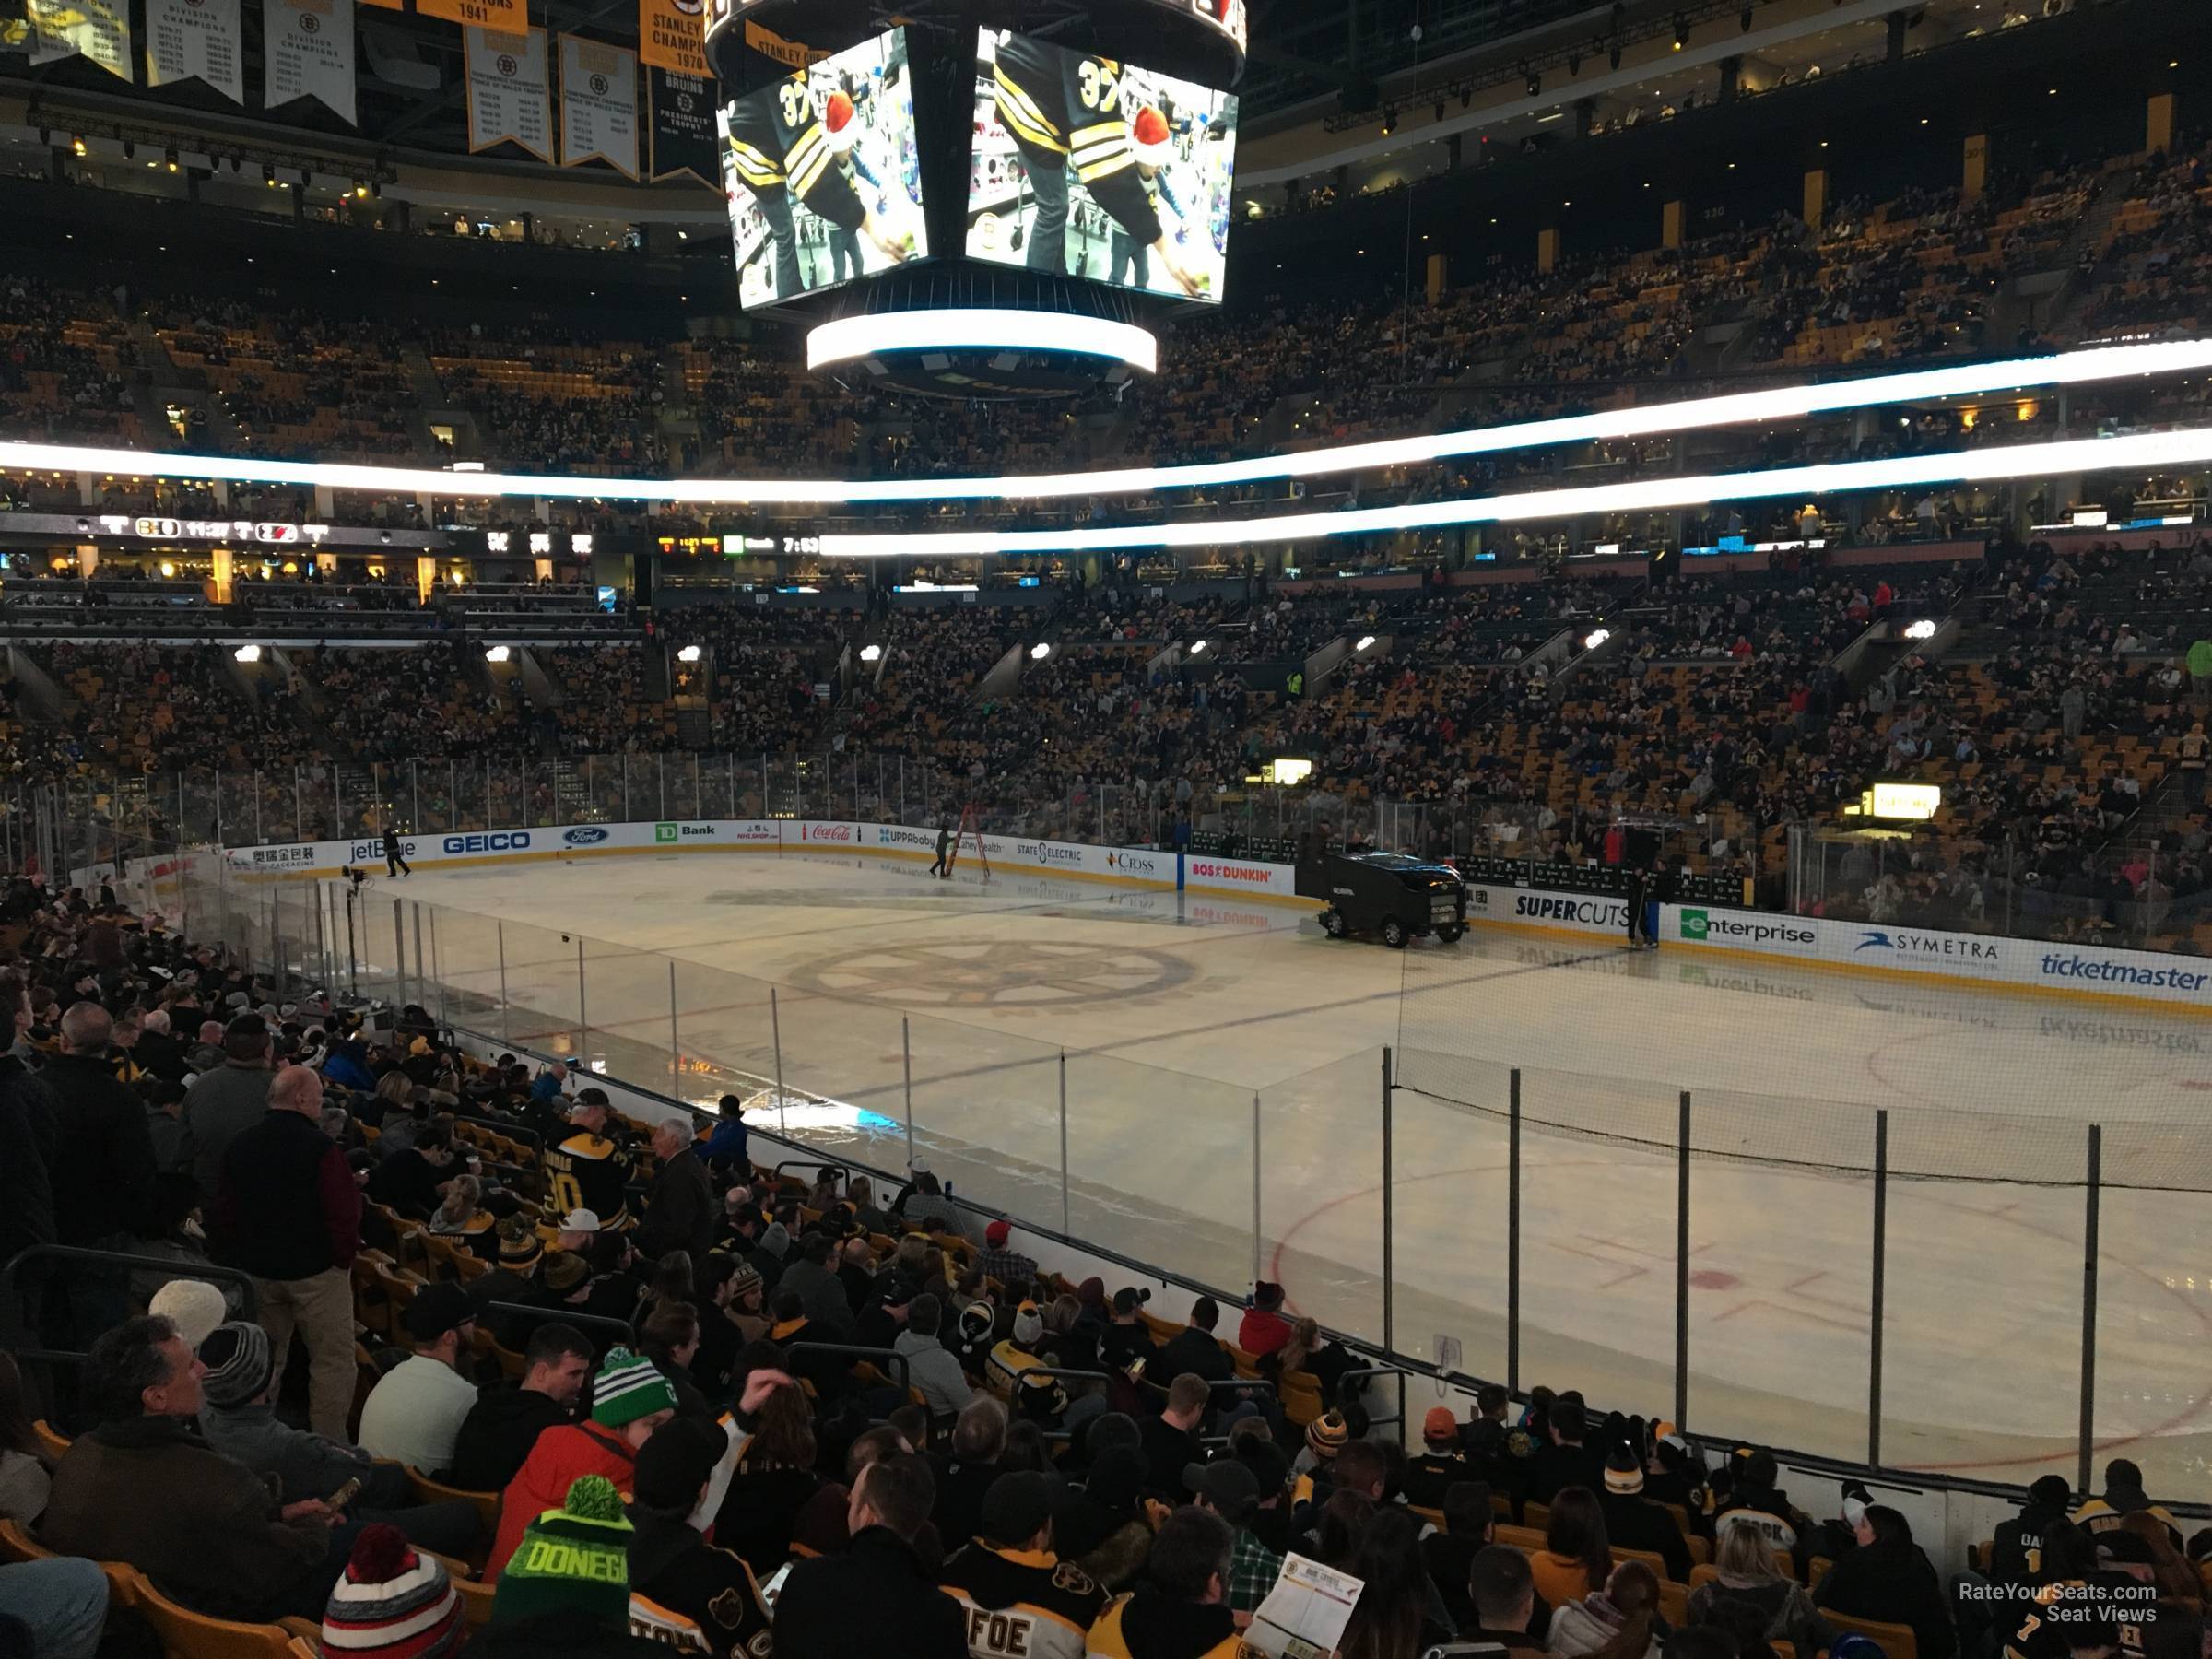 loge 9, row 15 seat view  for hockey - td garden